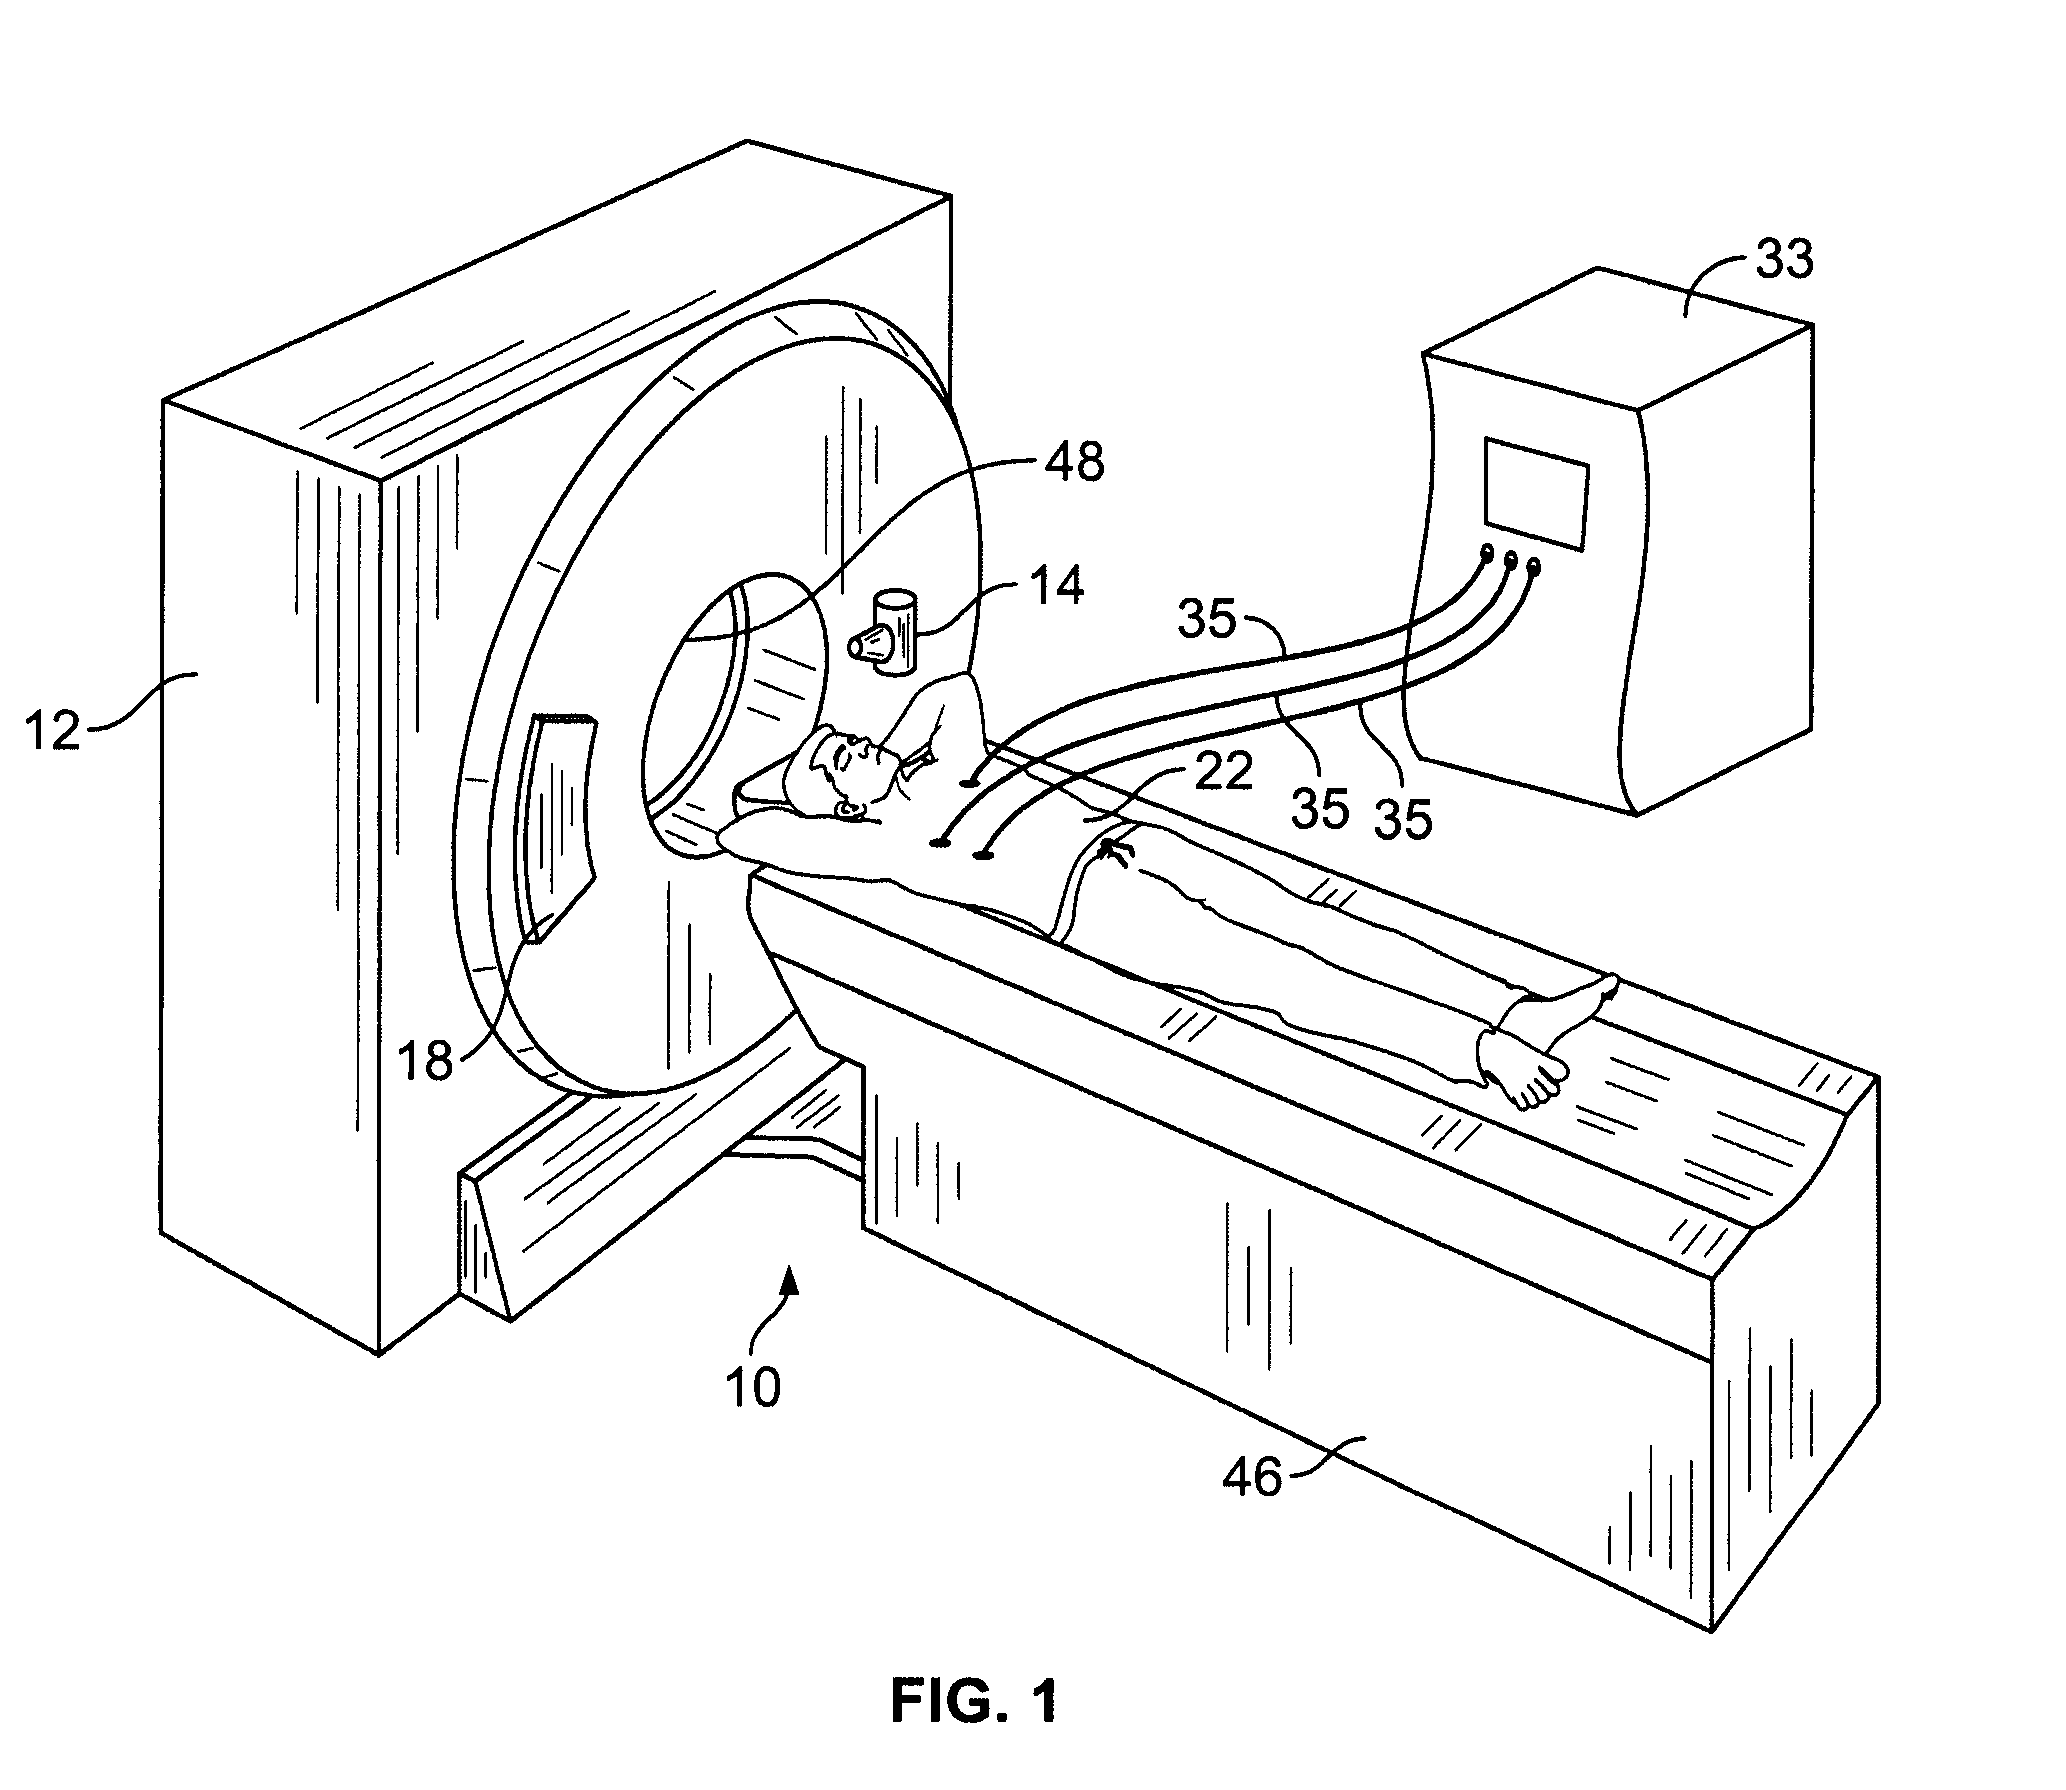 Method and apparatus for reconstructing images of moving structures based on motion cycle temporal data